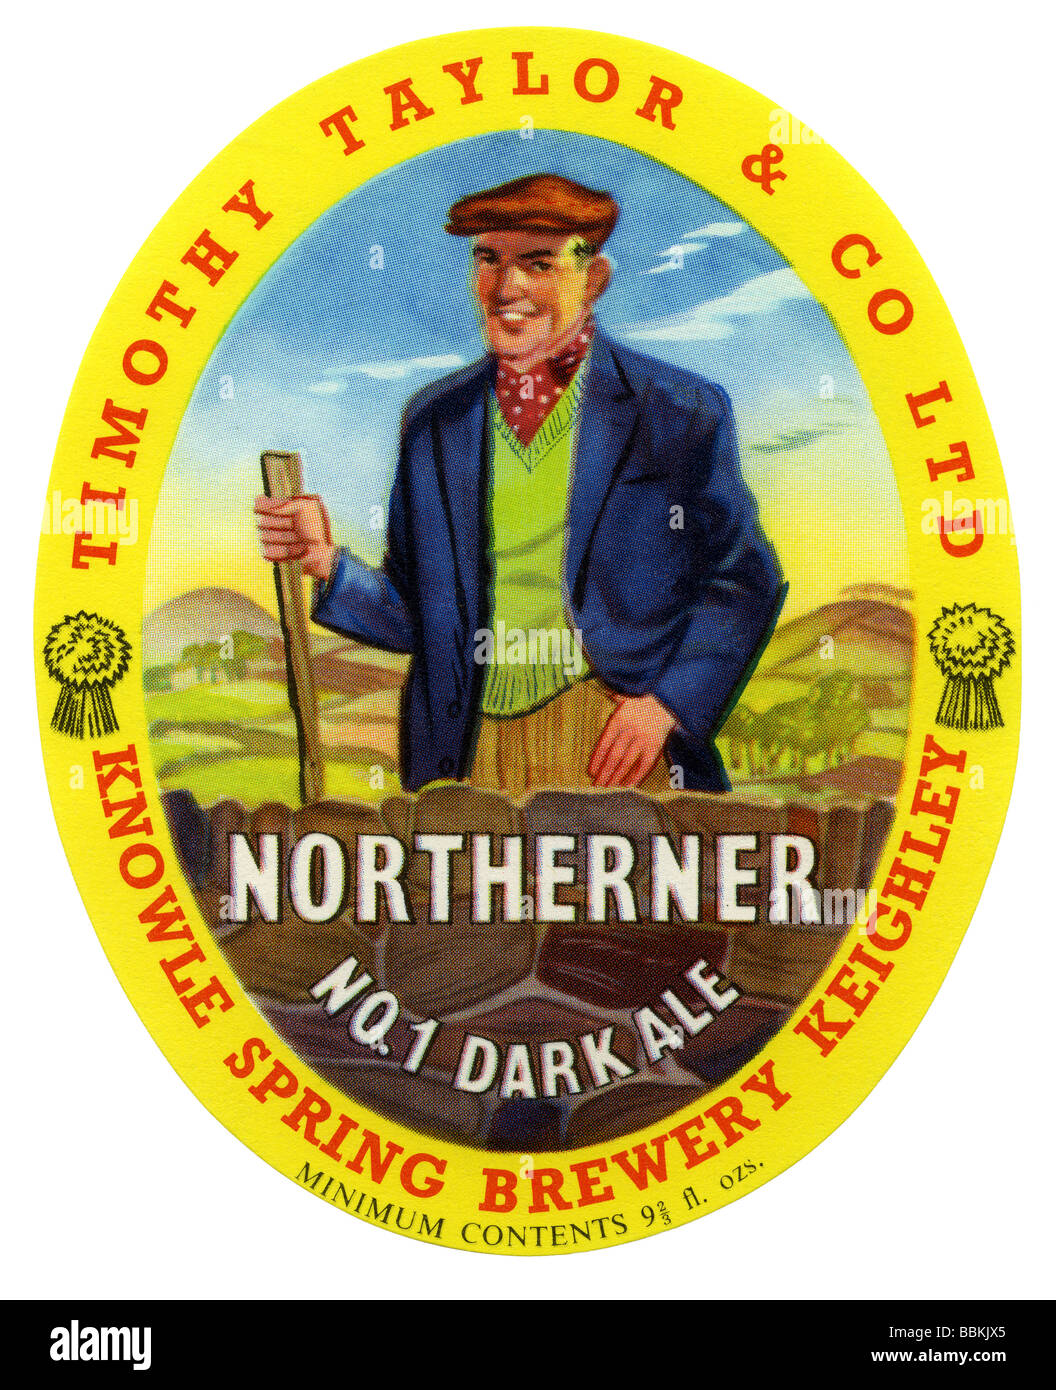 Old British beer label for Timothy Taylor's Northerner Dark Ale, Keighley, West Yorkshire Stock Photo